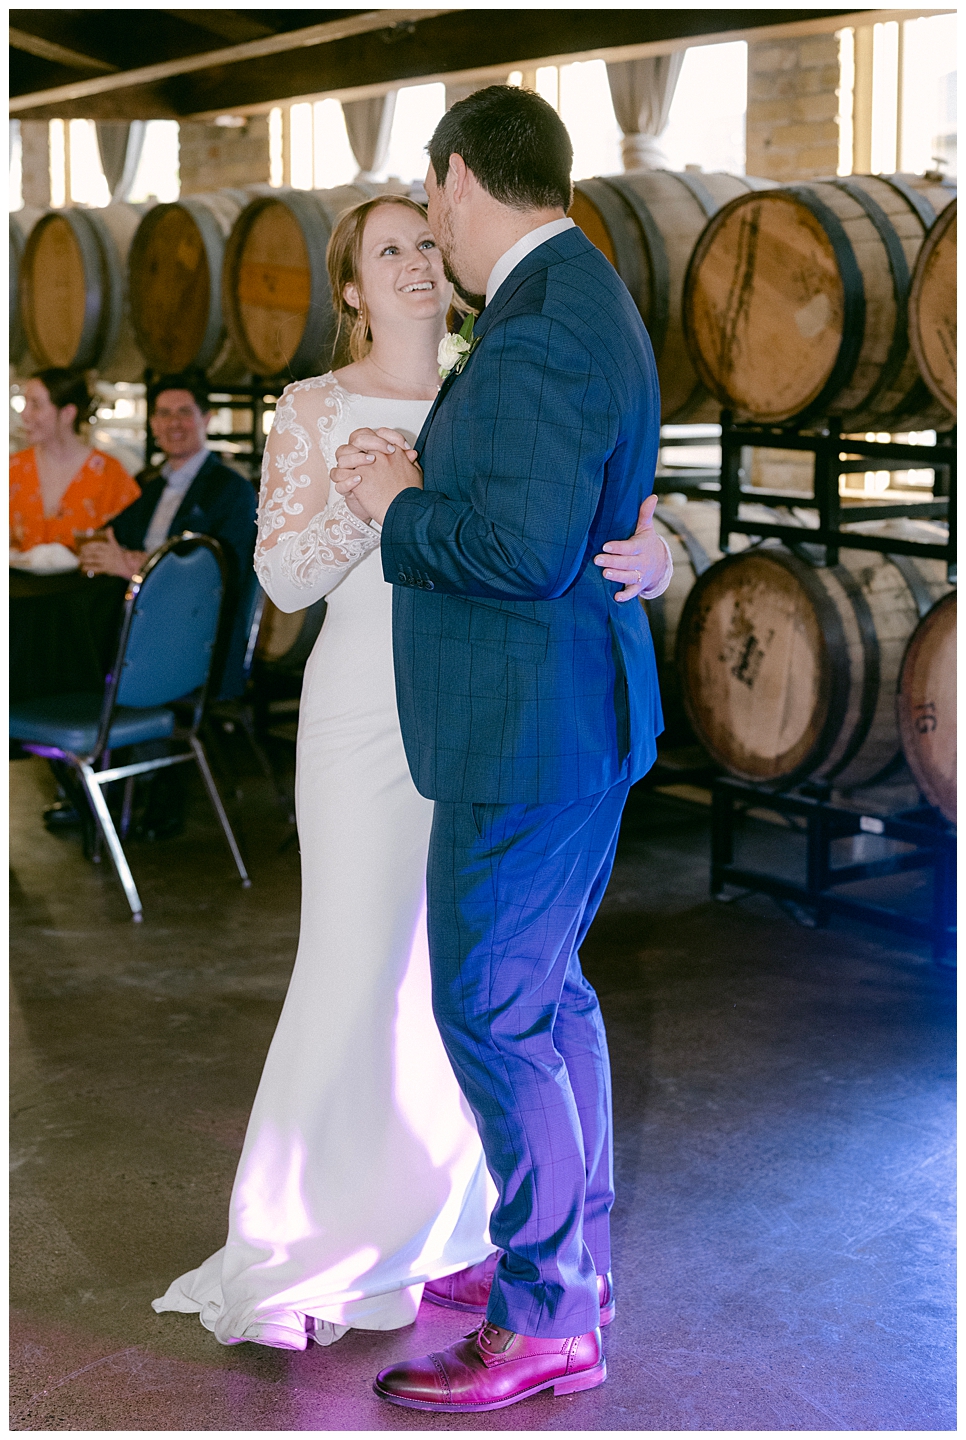 Bride and groom dance in front of barrels in Urban Growler's barrel room. Photo by Kayla Lee.